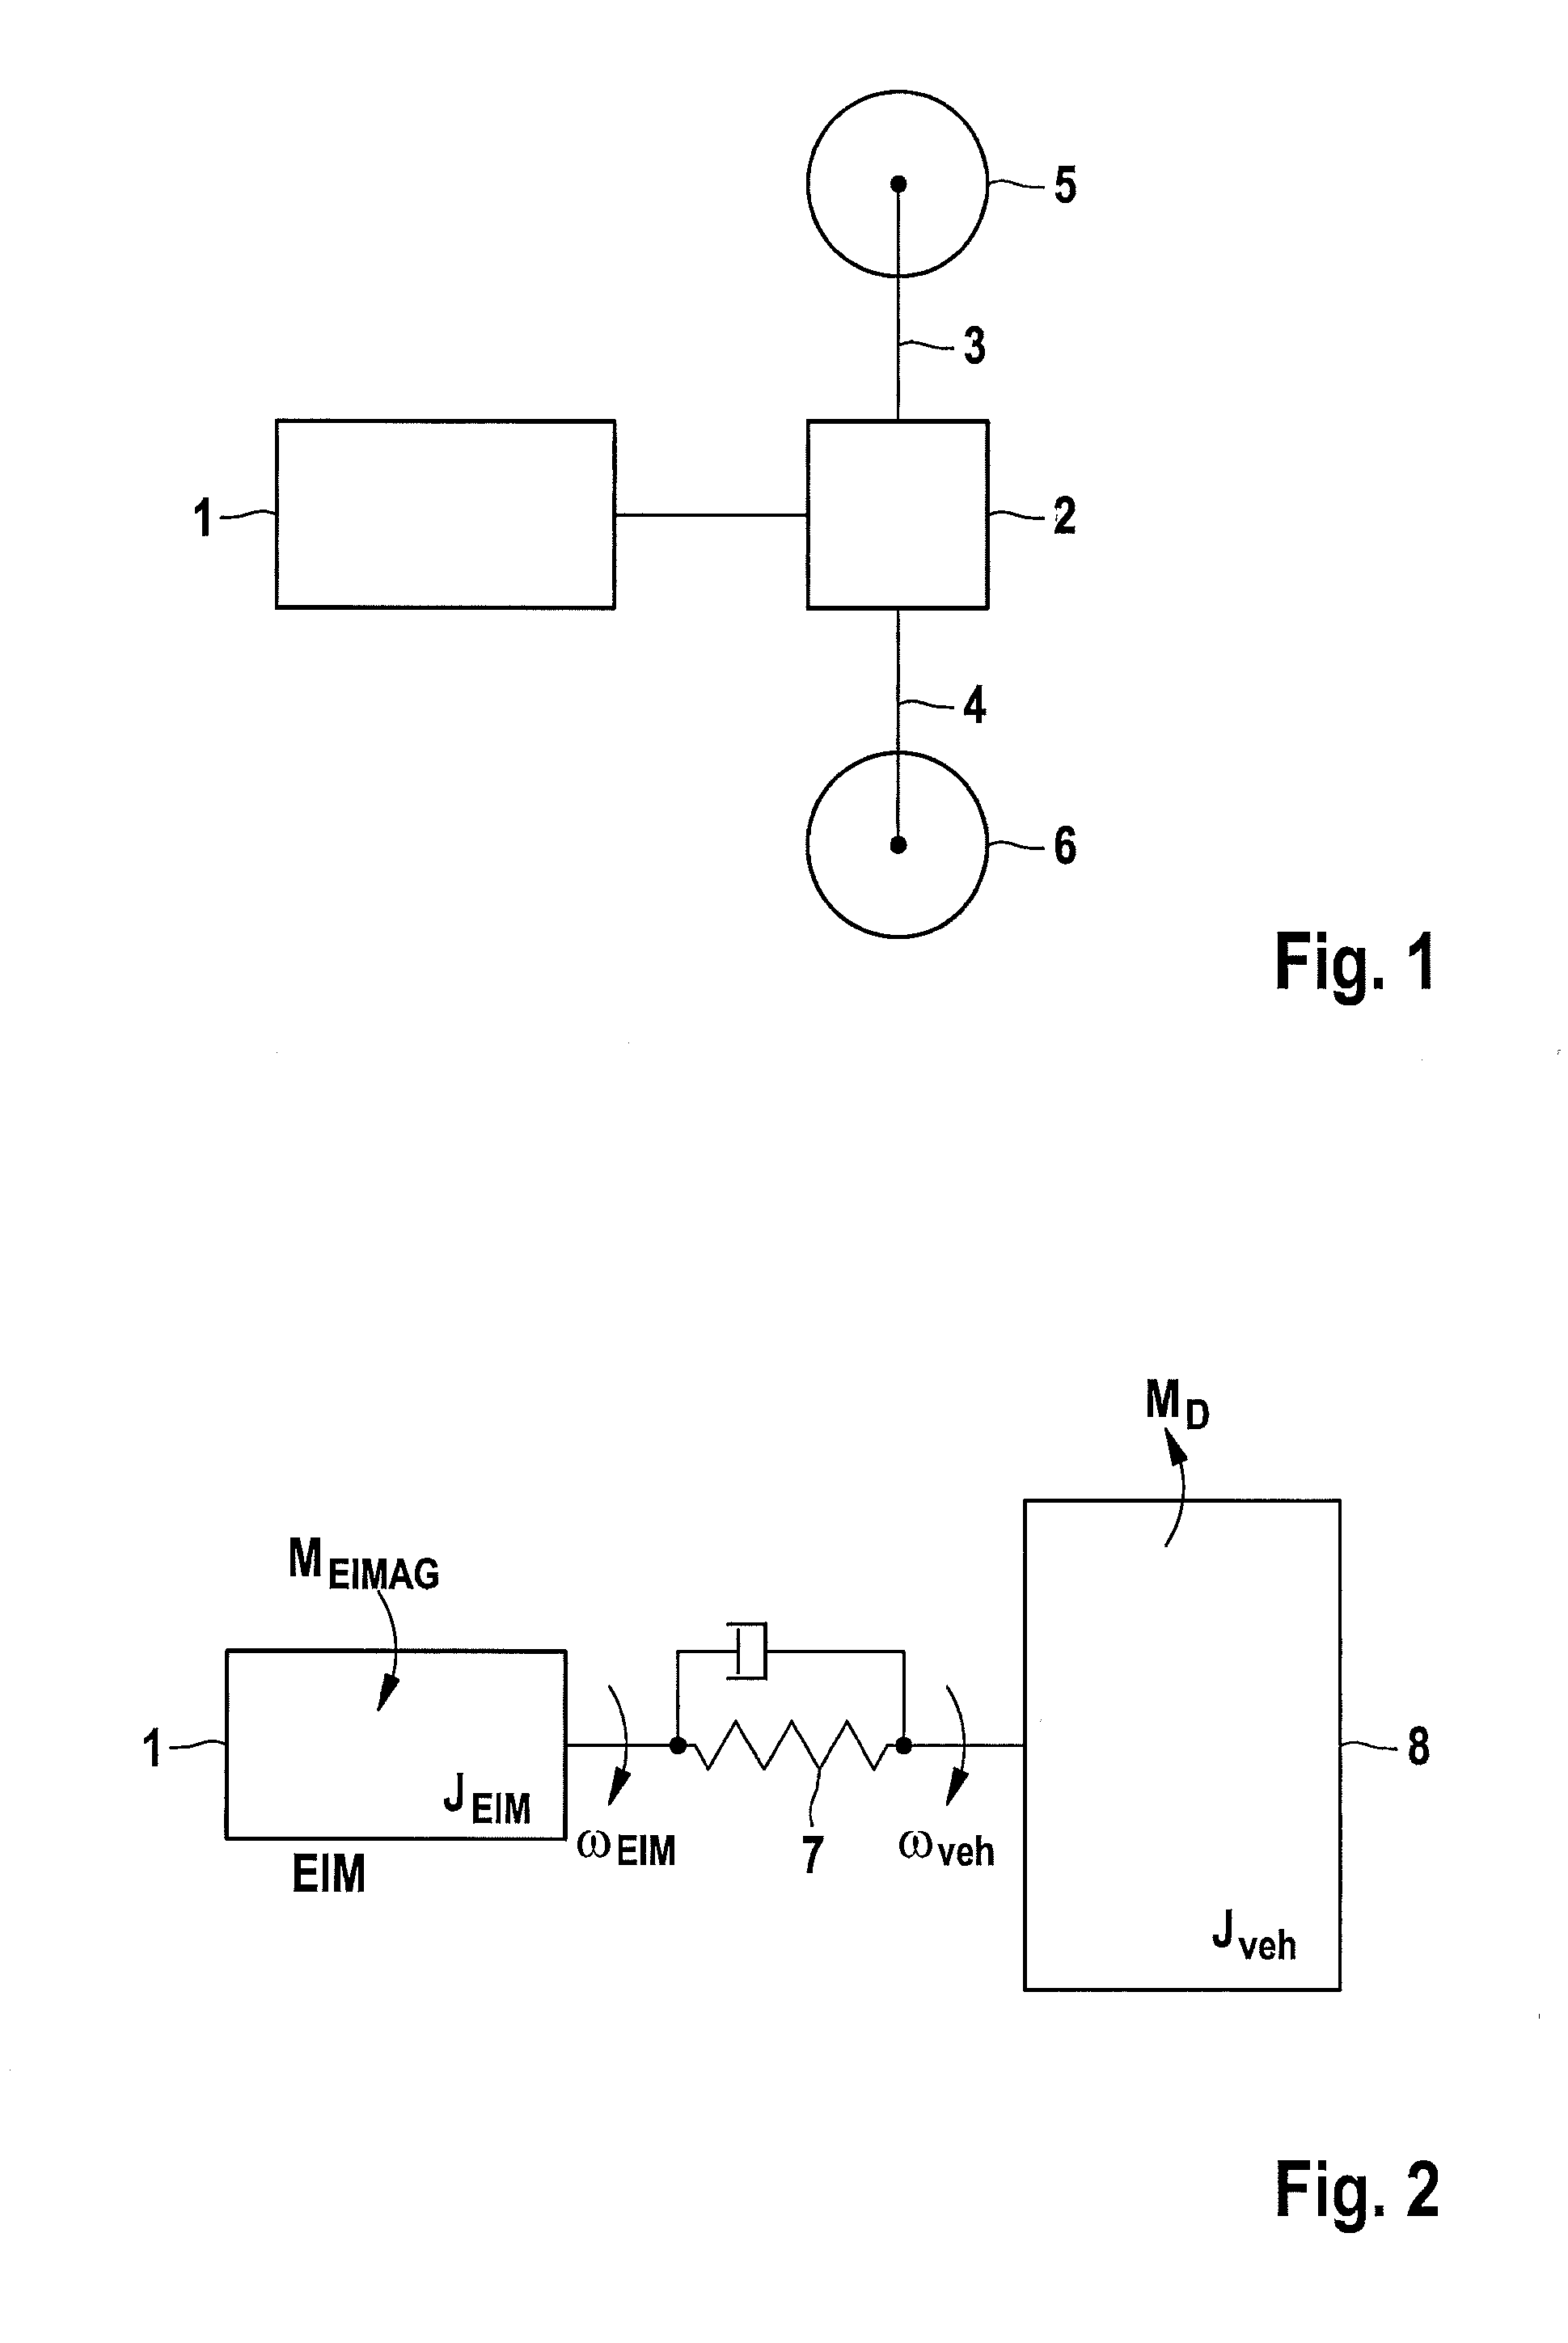 Method and device for recognizing unintended drive train responses of a motor vehicle having at least one drive unit